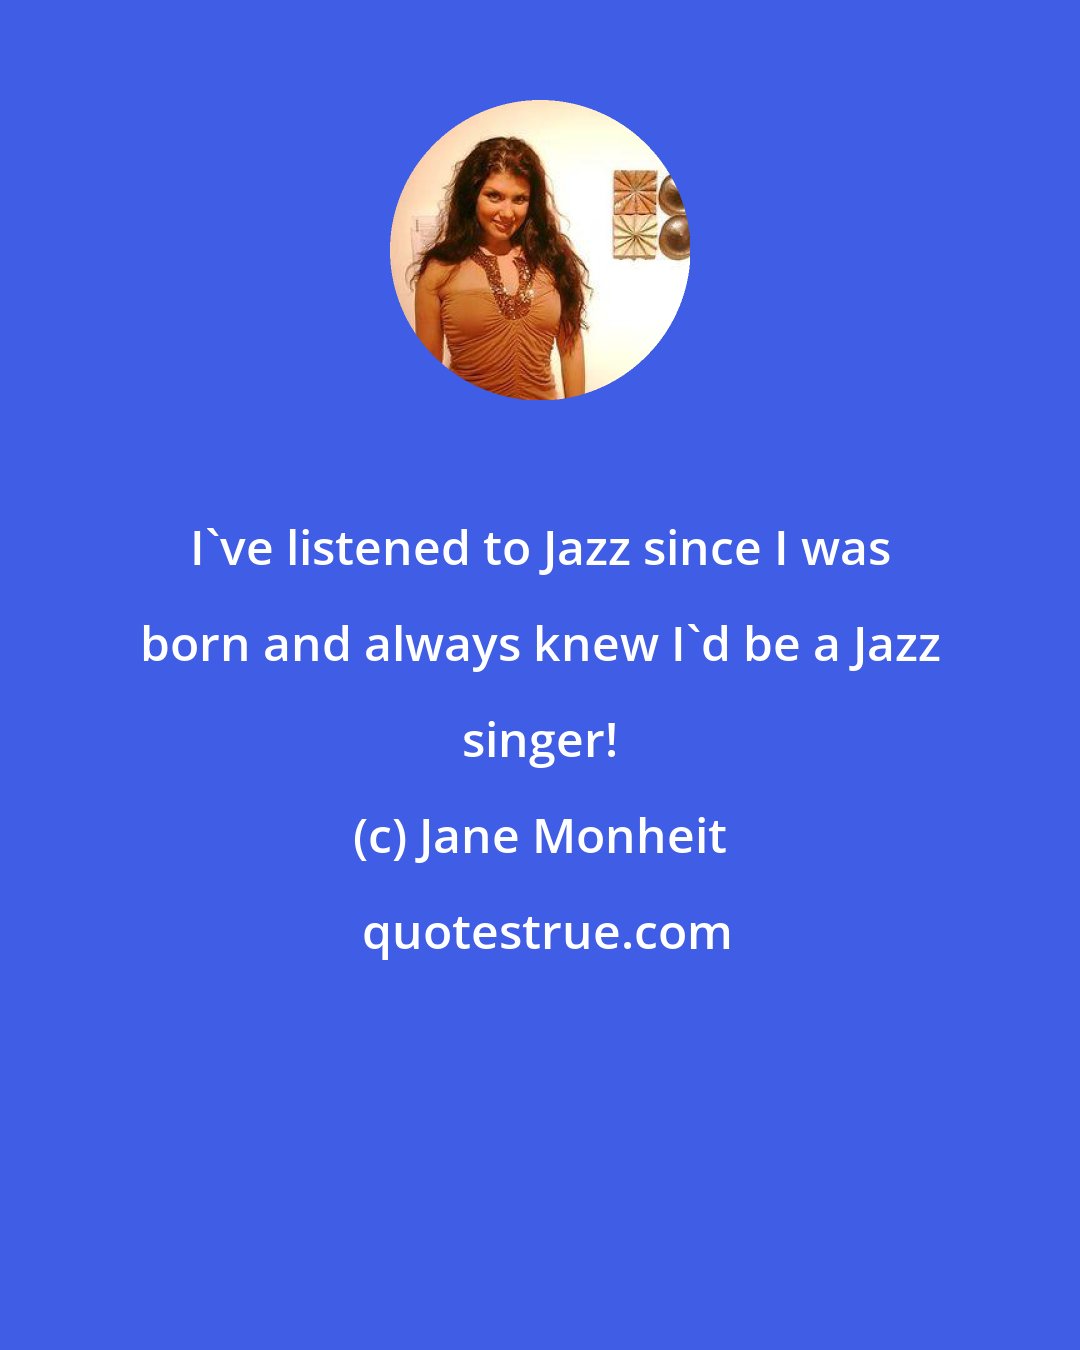 Jane Monheit: I've listened to Jazz since I was born and always knew I'd be a Jazz singer!